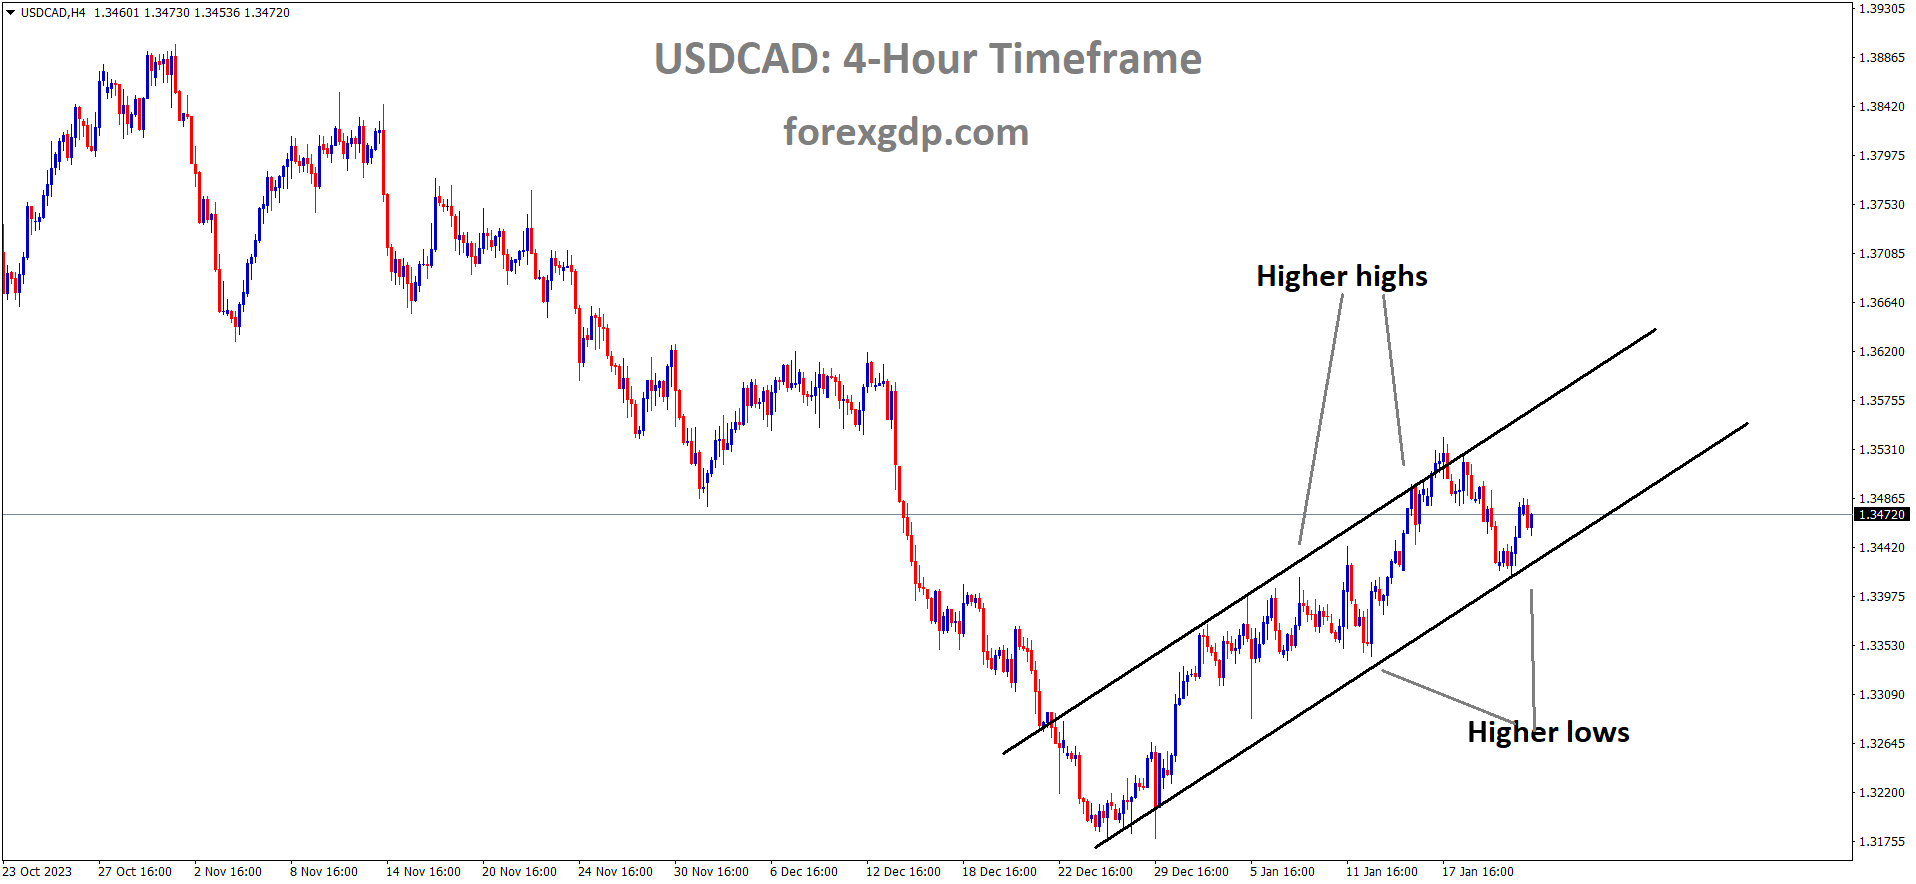 USDCAD is moving in an Ascending channel and the market has rebounded from the higher low area of the channel